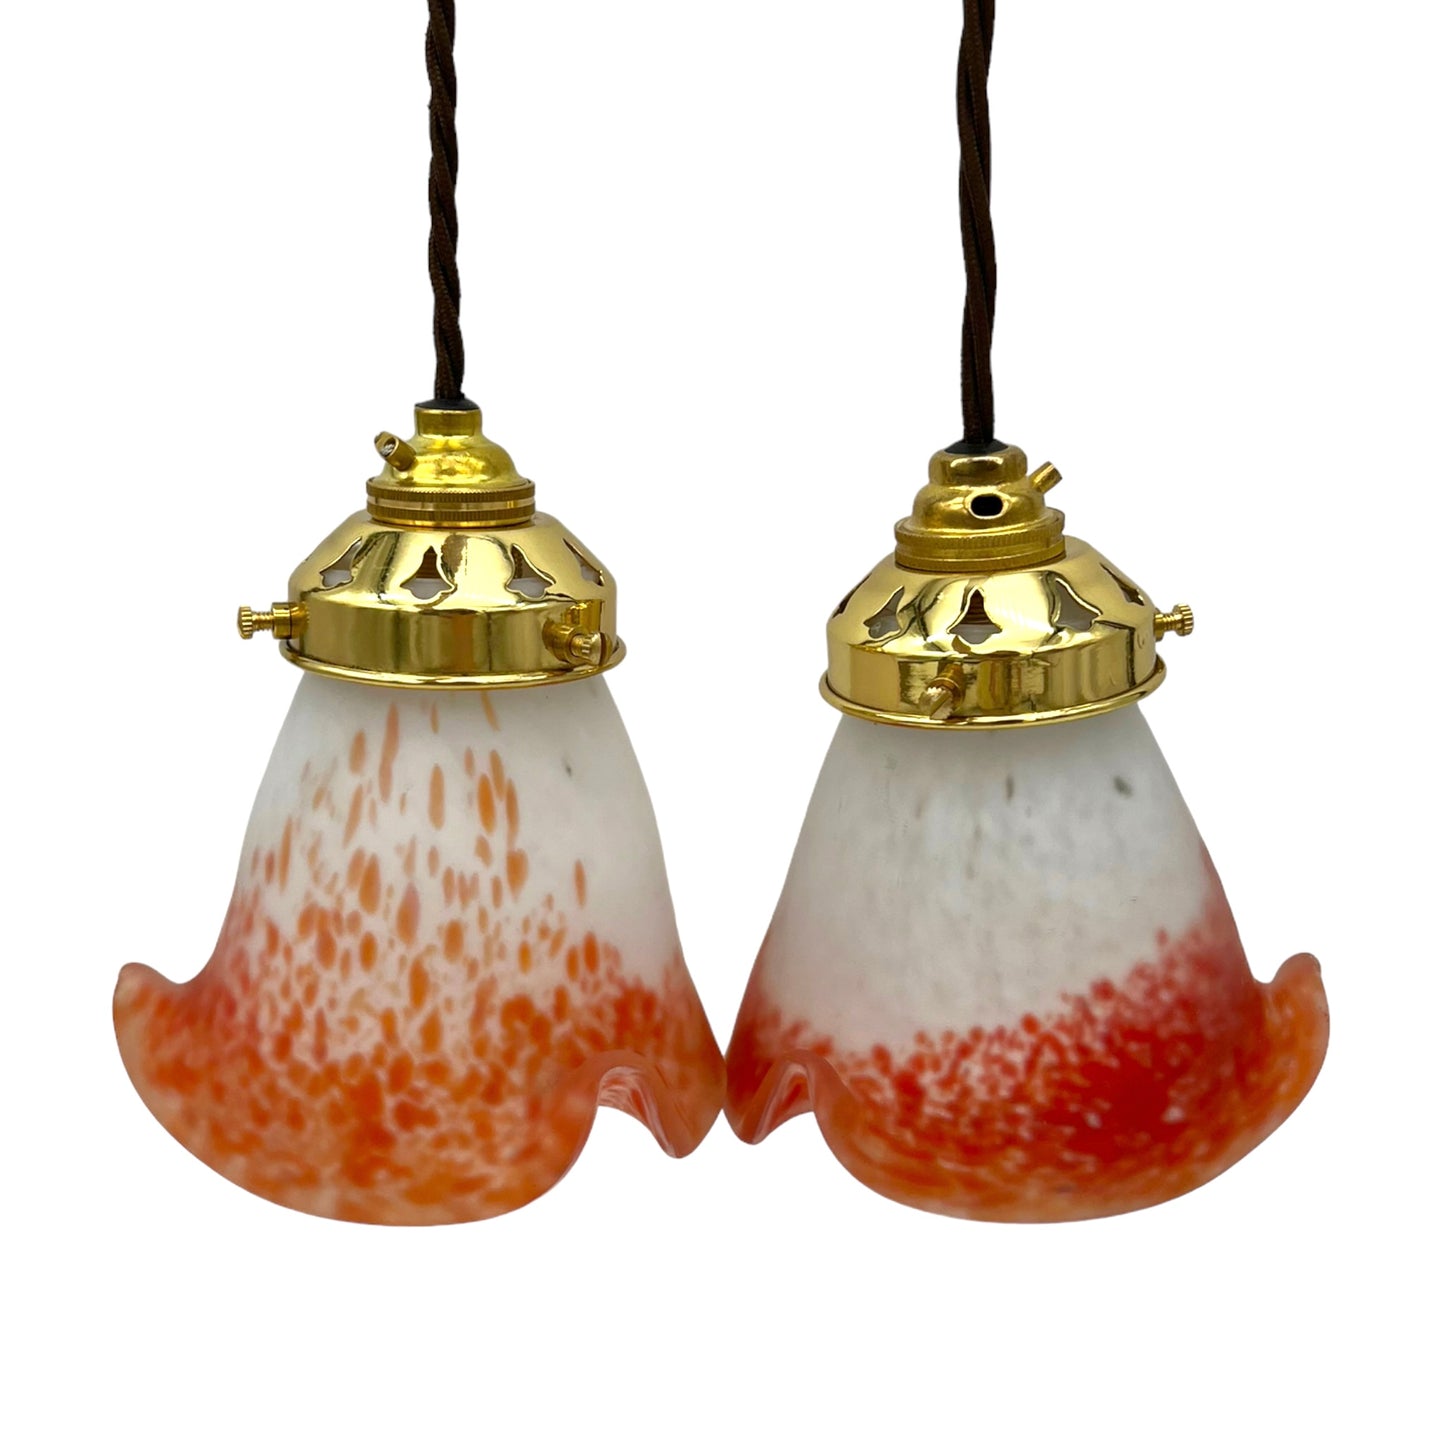 Pair of French Vintage Pendant Glass Ceiling Lampshades with new fittings (B54)